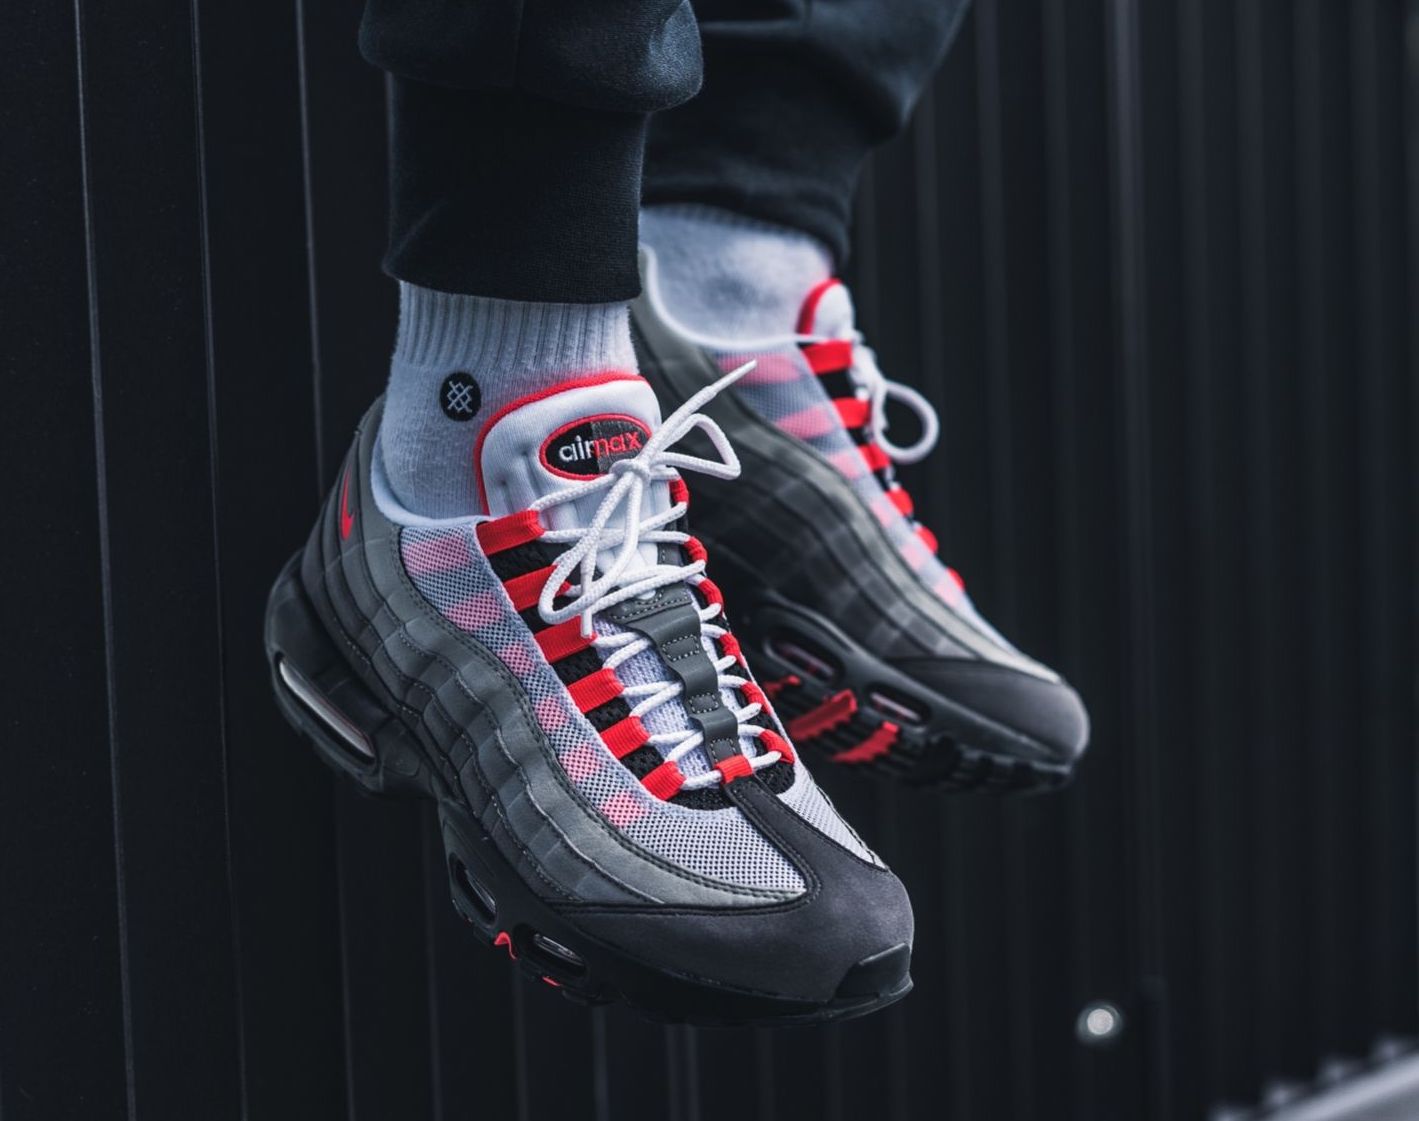 On Sale: Nike Air Max 95 OG "Solar Red" — Sneaker Shouts